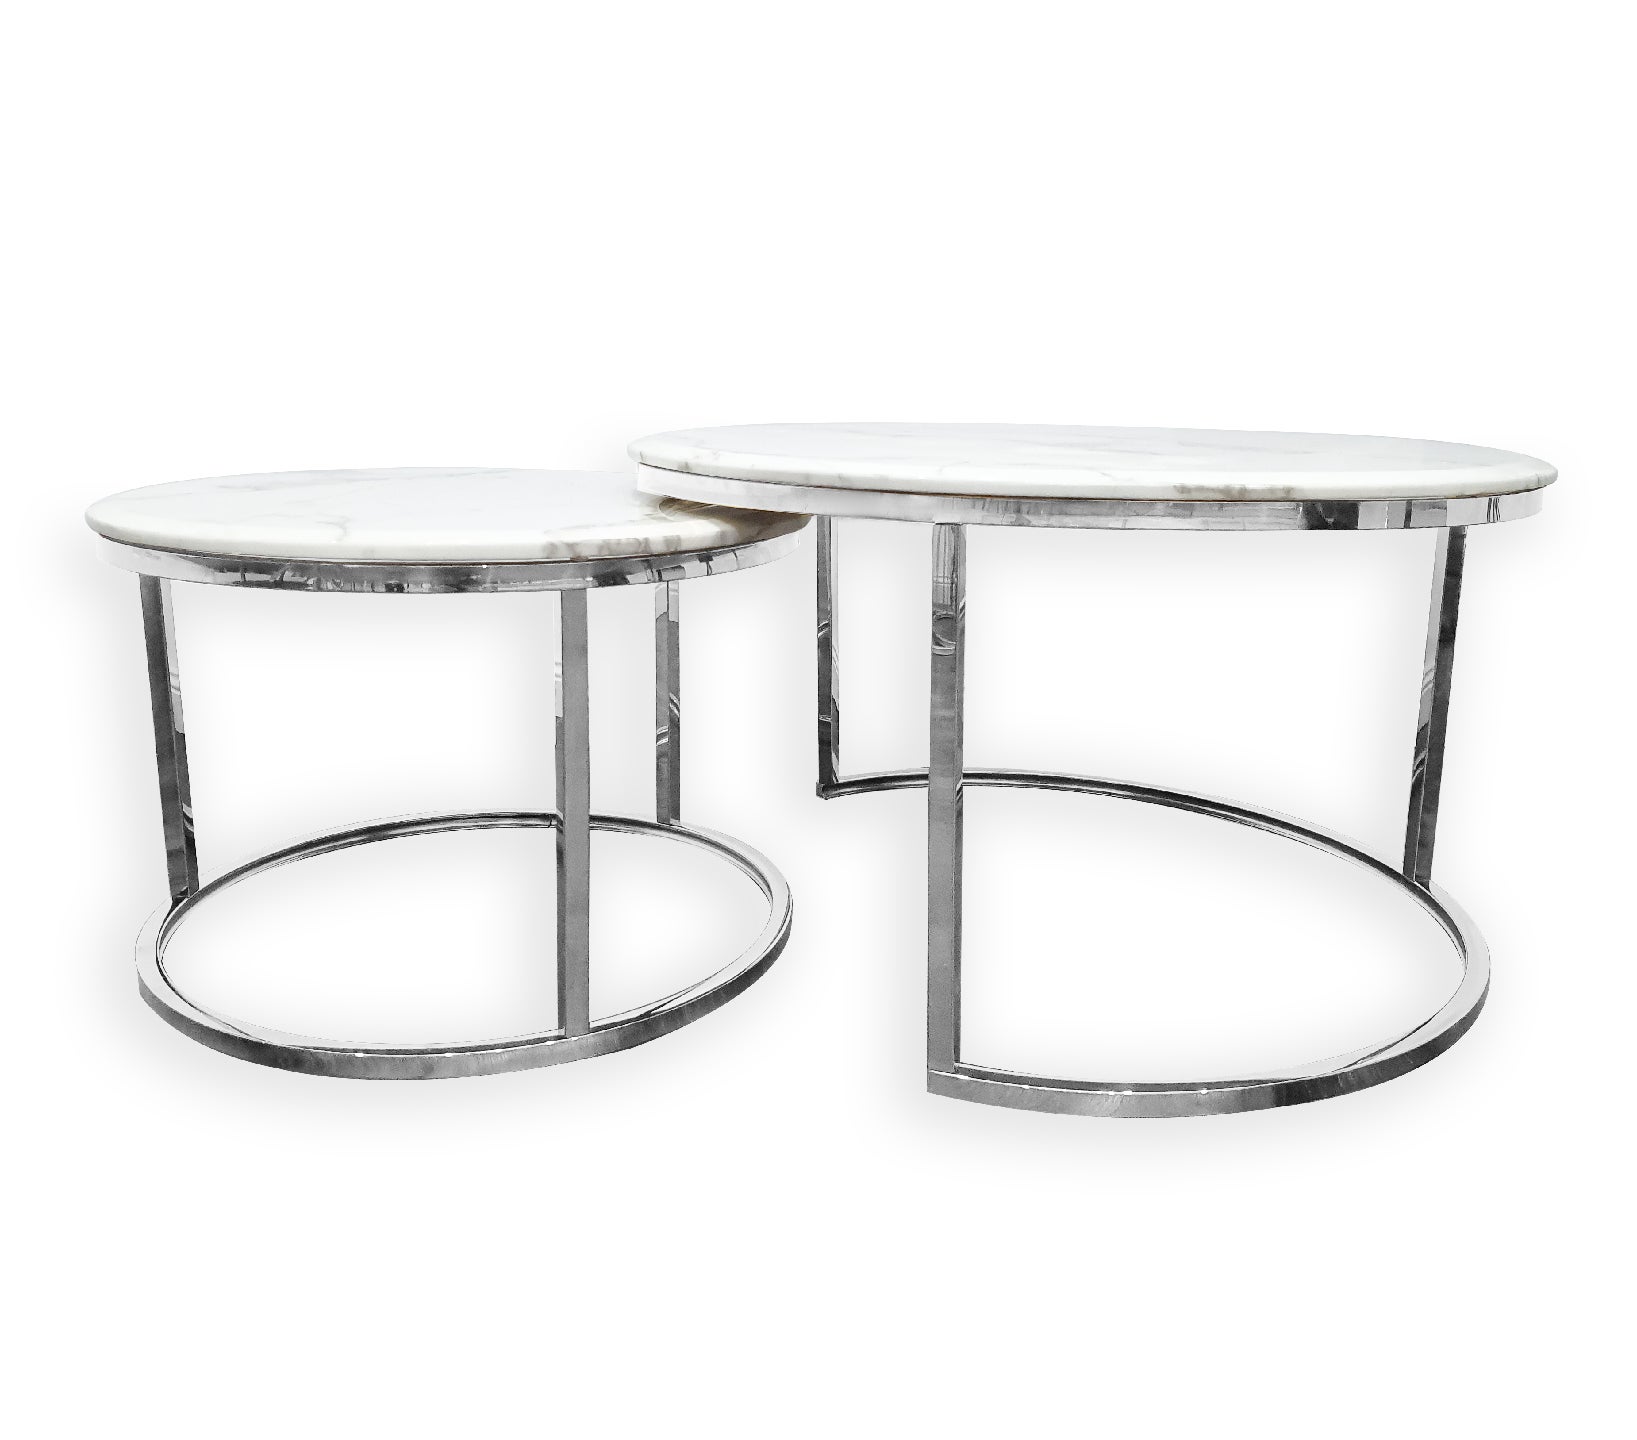 Romana set of 2 Marble Top Nesting Coffee Table - Large 80cm/60cm - SILVER